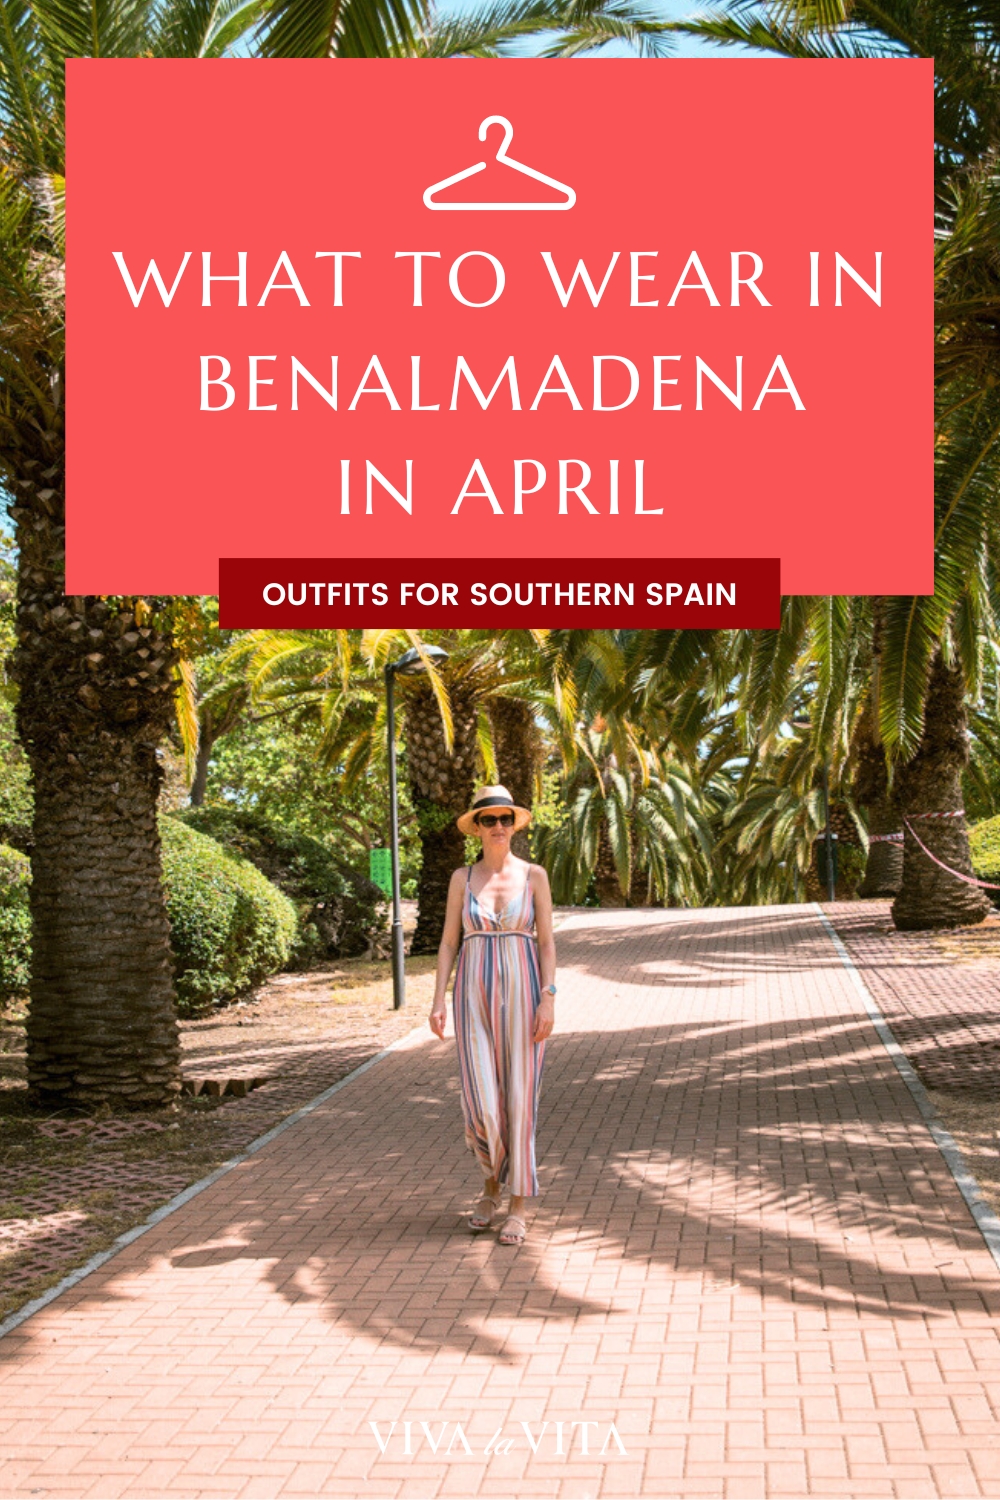 Pinterest image showing a woman strolling in a park in Benalmadena, with a headline: what to wear in Benalmadena in April - outfits for Southern Spain